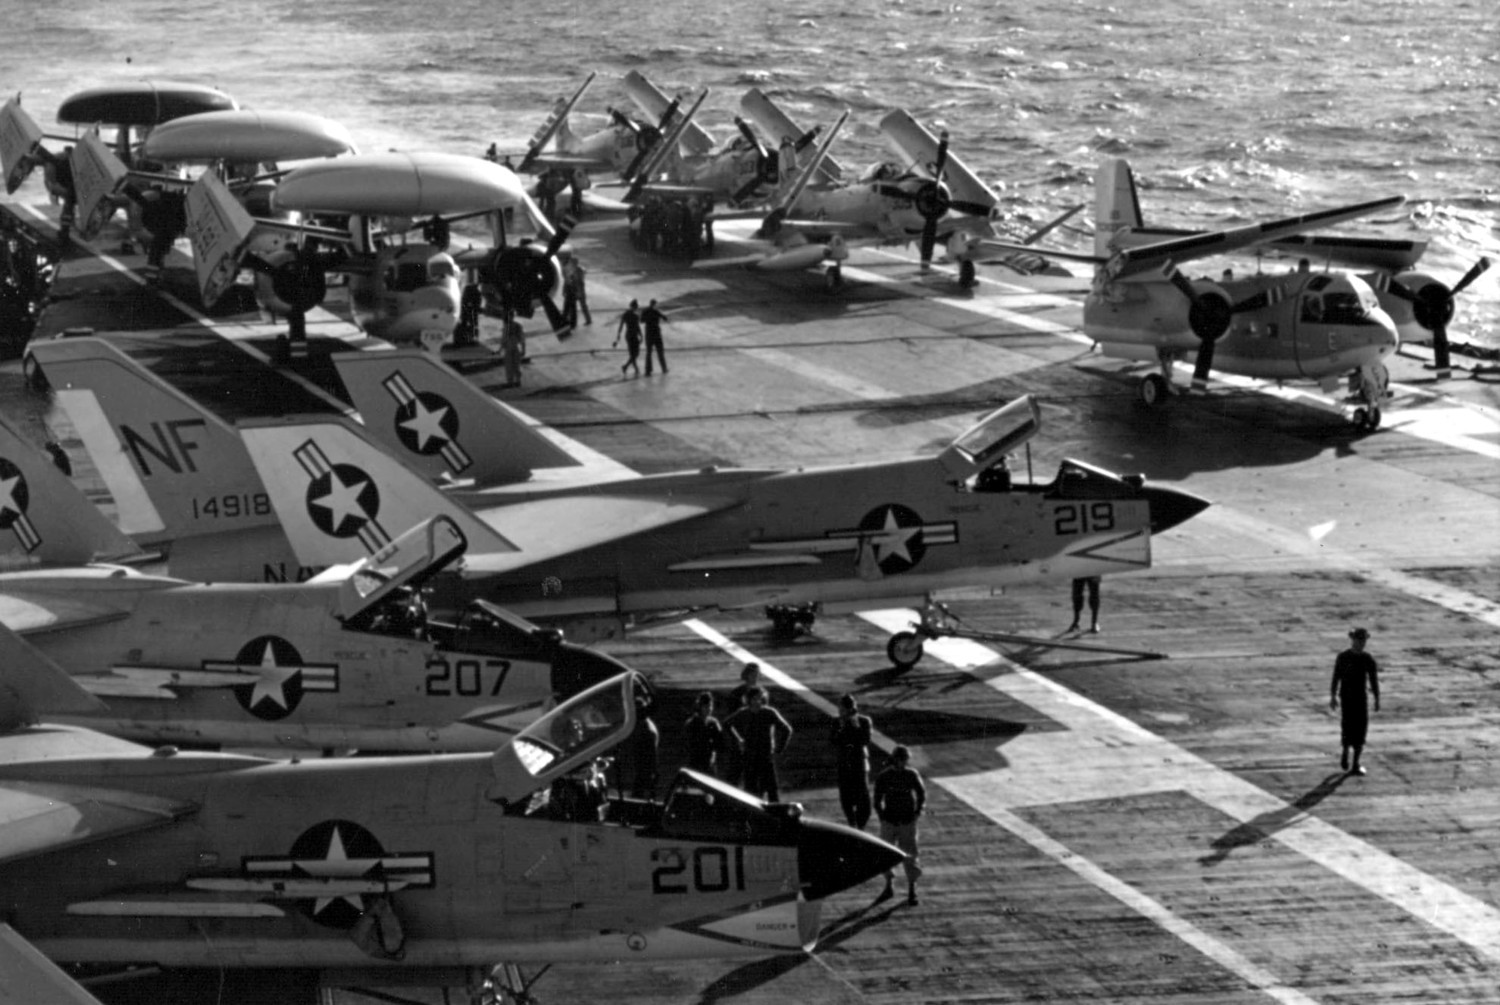 cvw-5 carrier air wing us navy uss ticonderoga cva-14 embarked squadrons 55